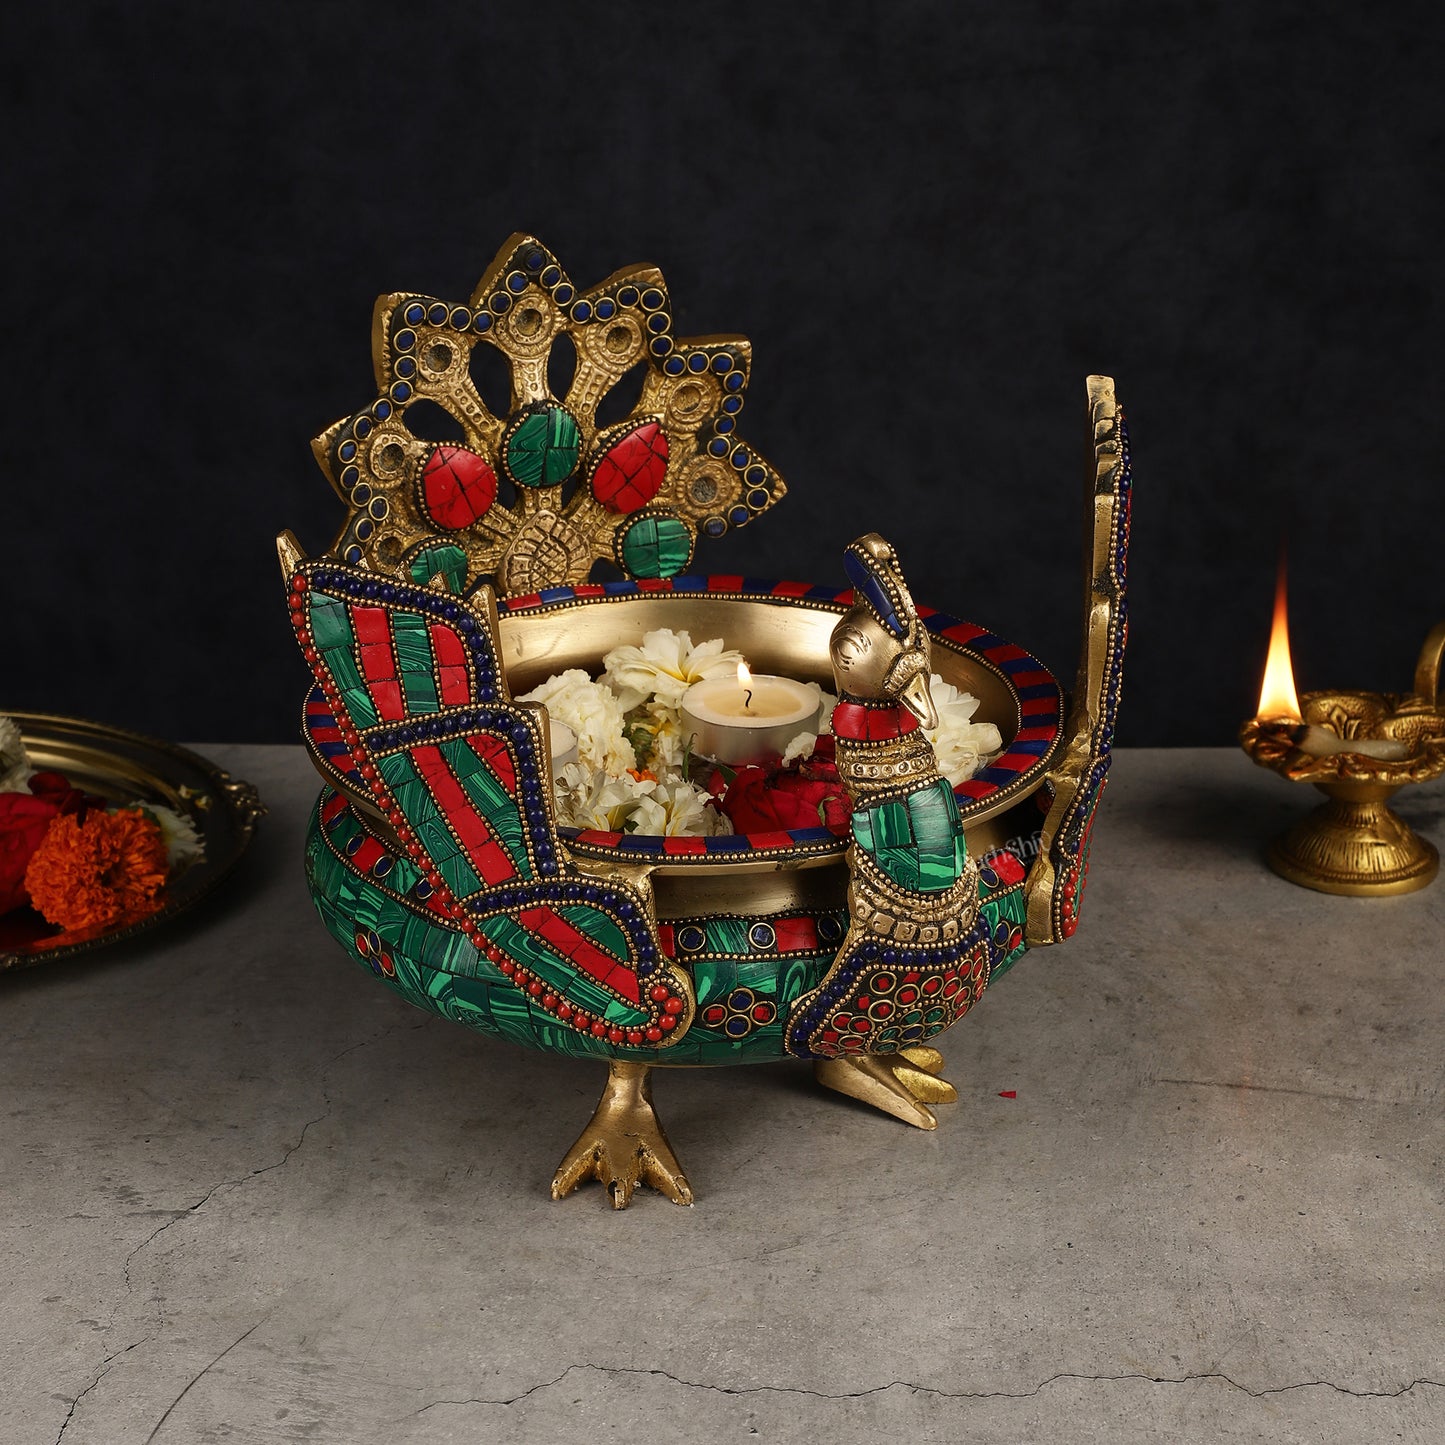 Brass Peacock Shaped Urli Bowl with Stand - Exquisite Decorative Accent